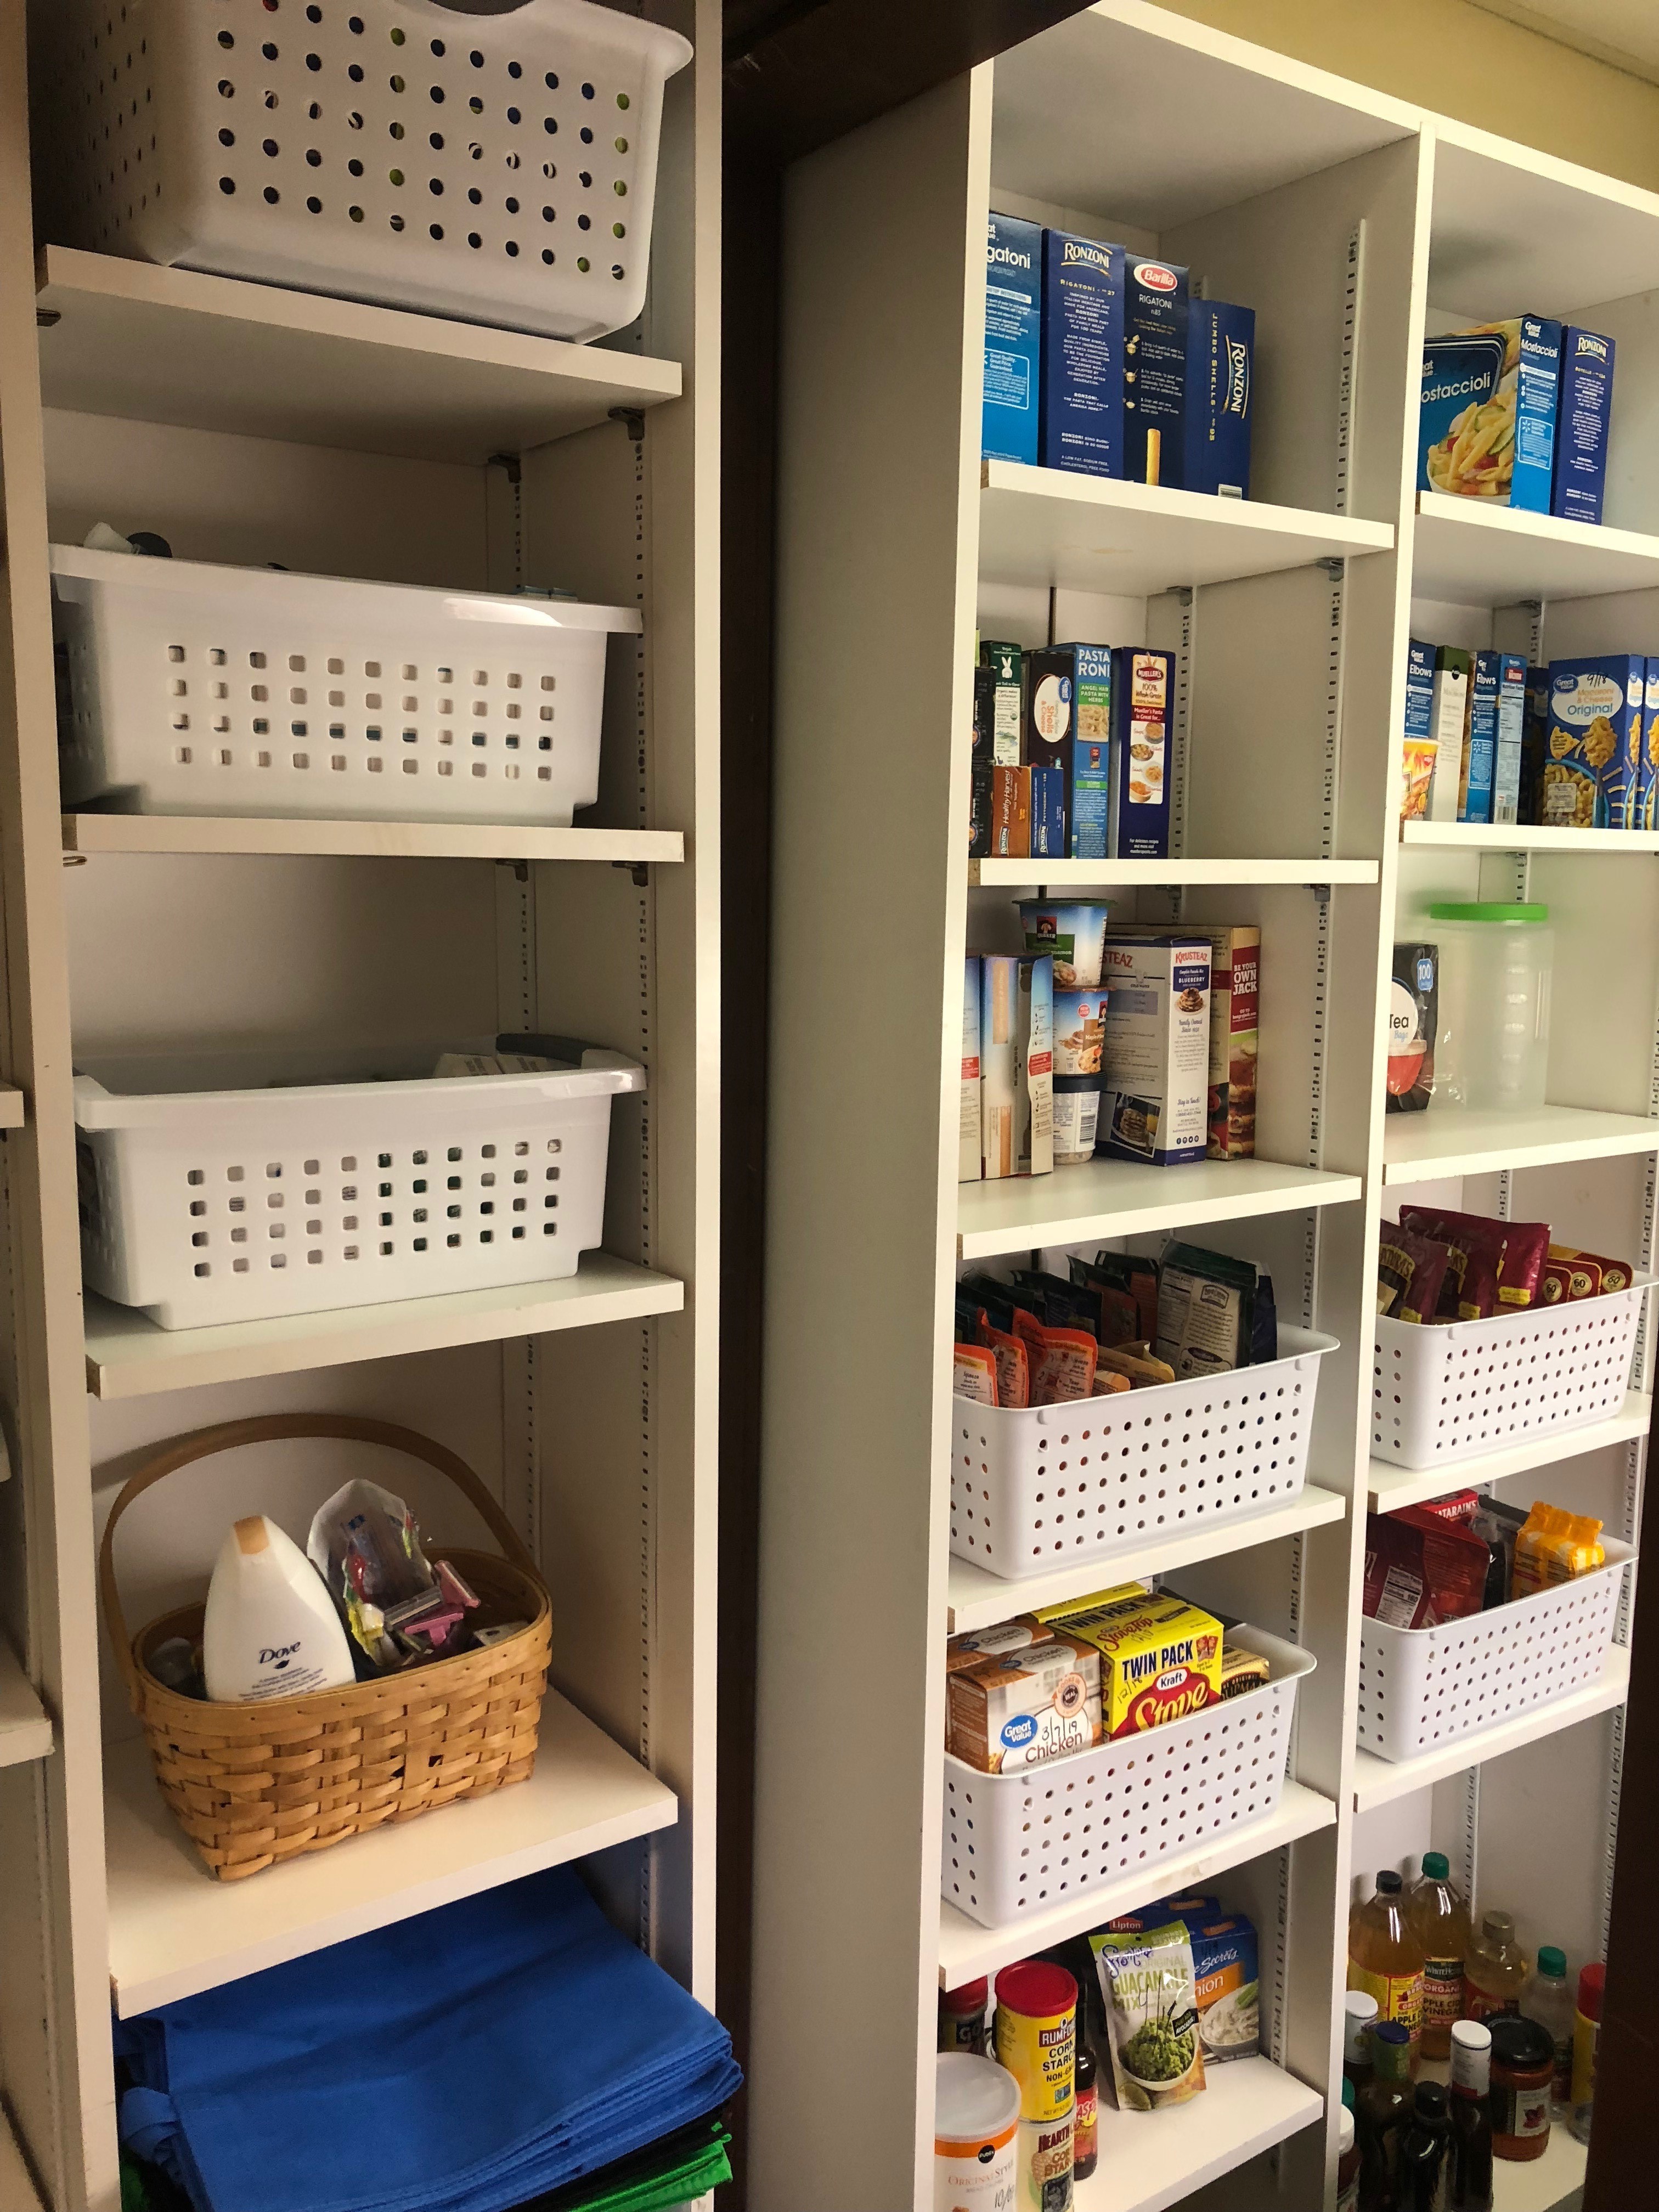 A neatly organized food pantry, containing an assortment of dry goods and personal care items